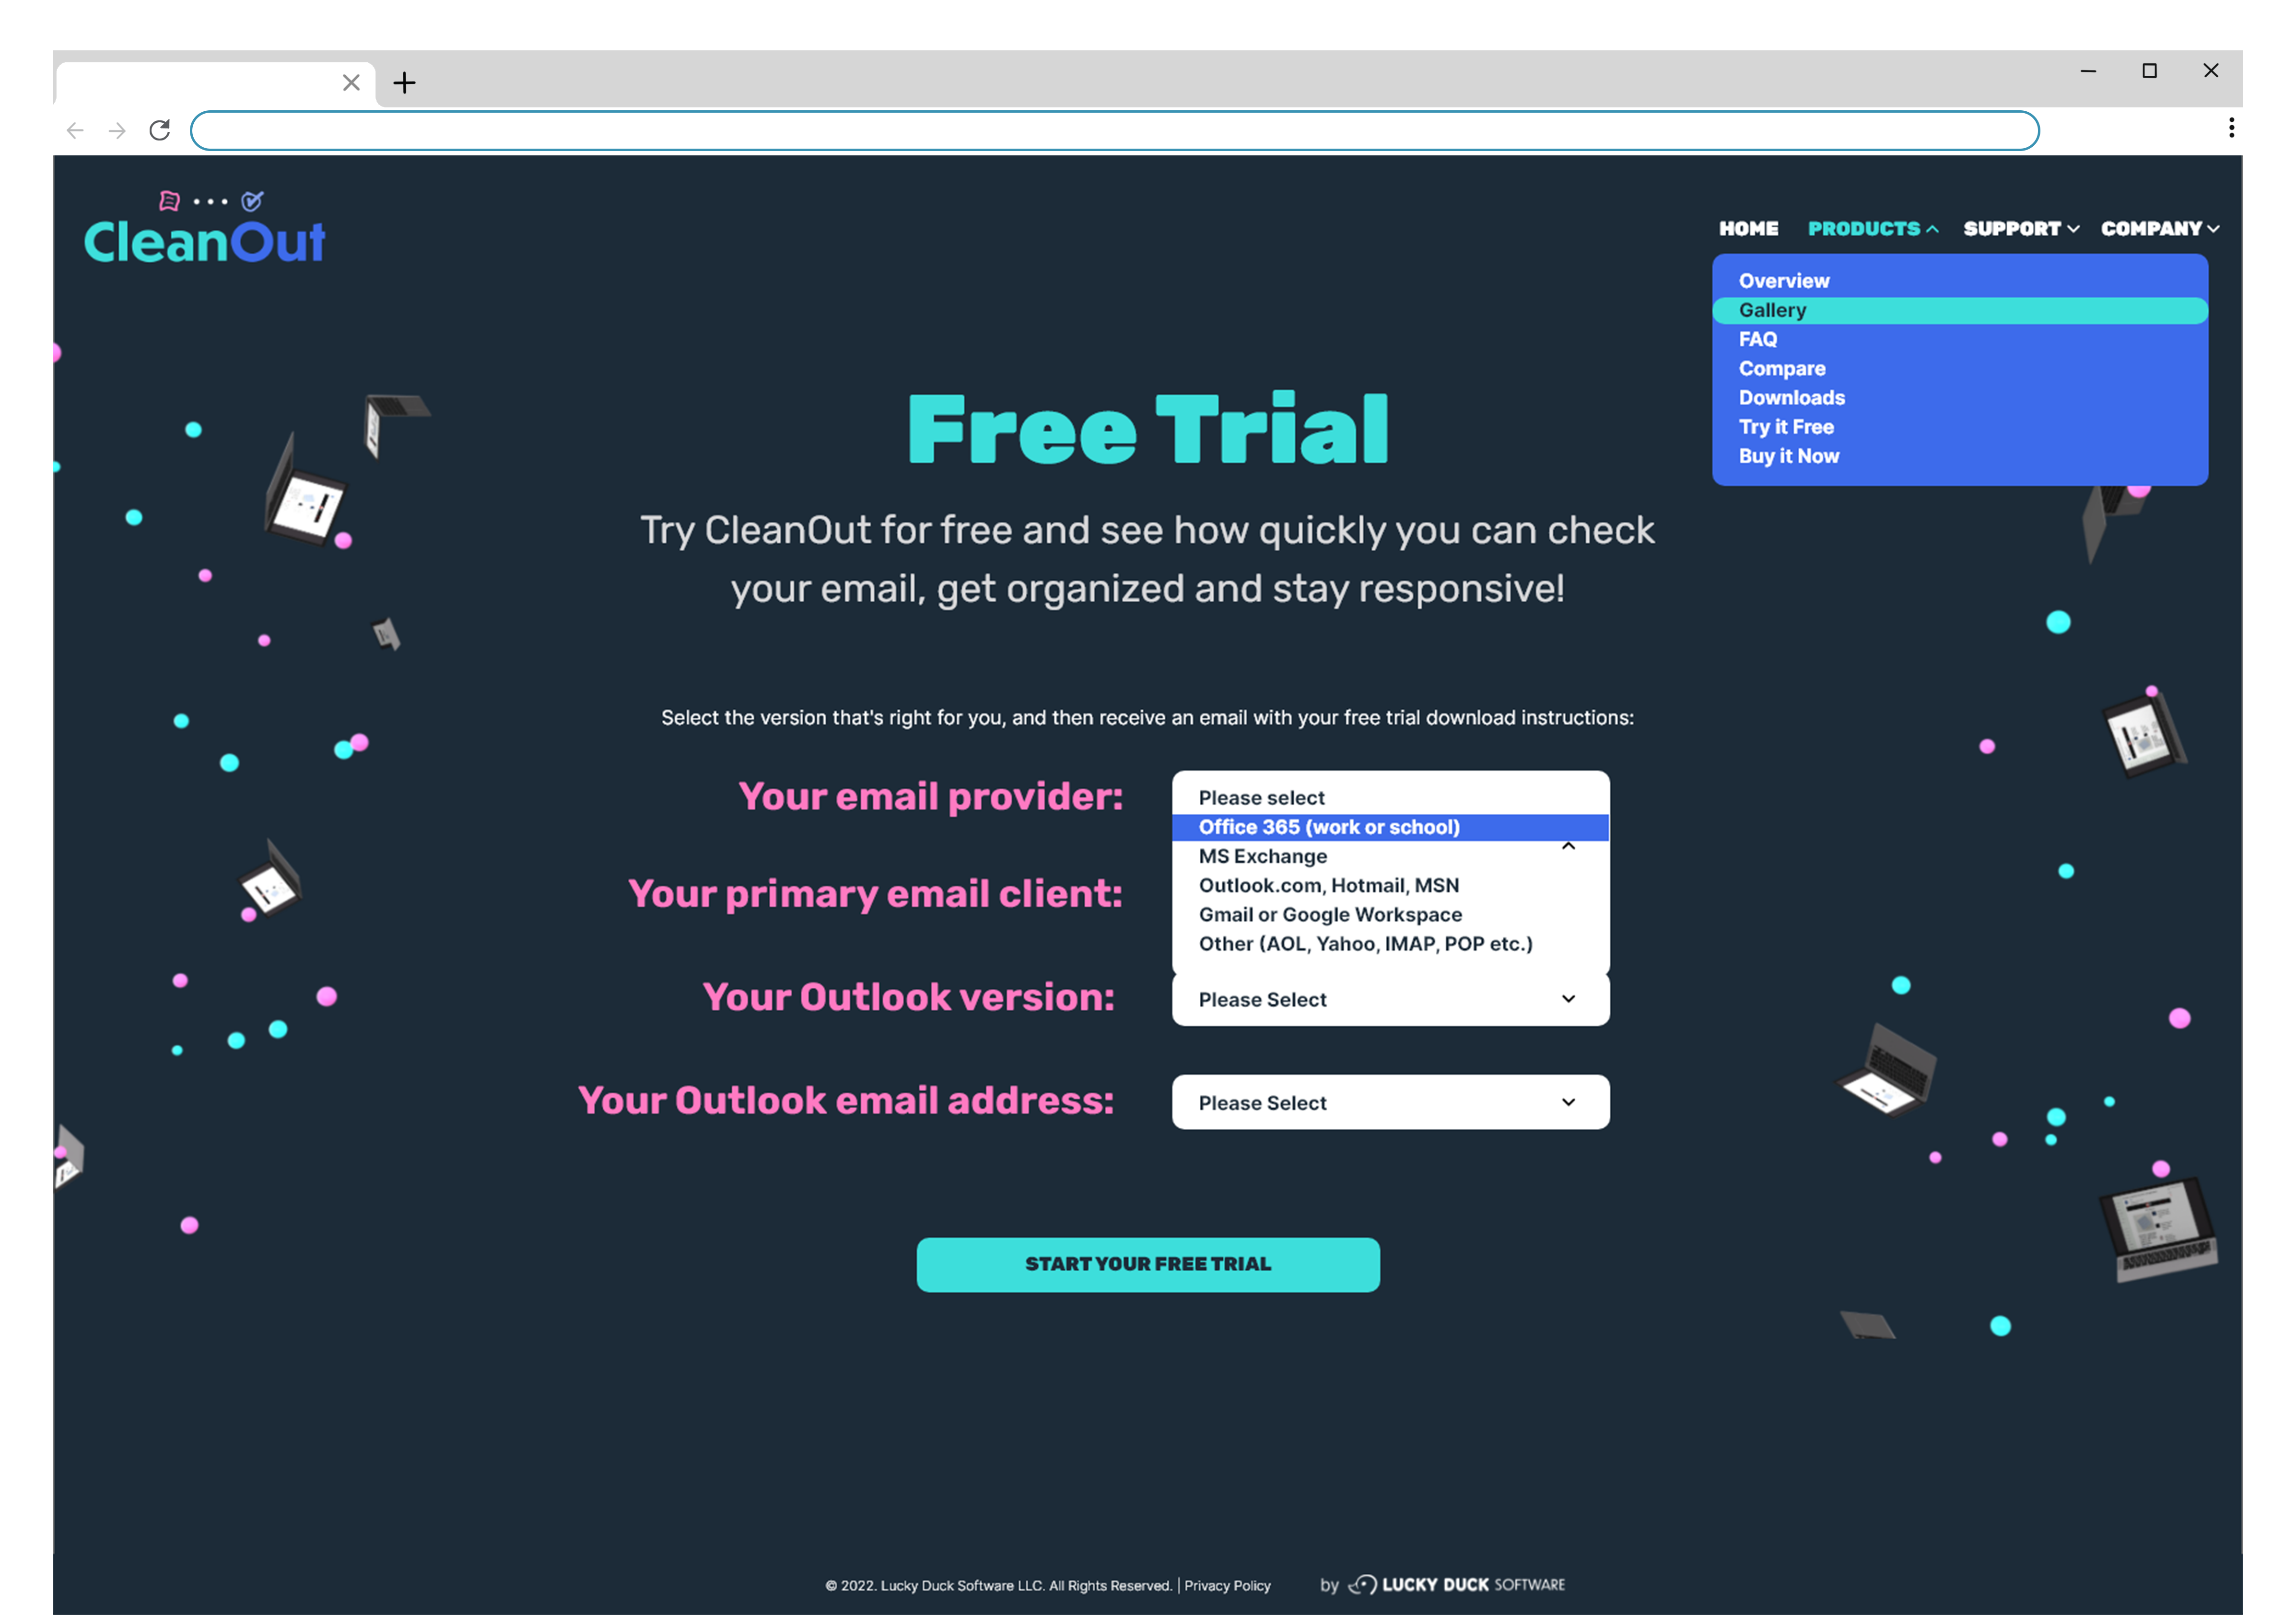 CleanOut Web Design Project - Free Trial